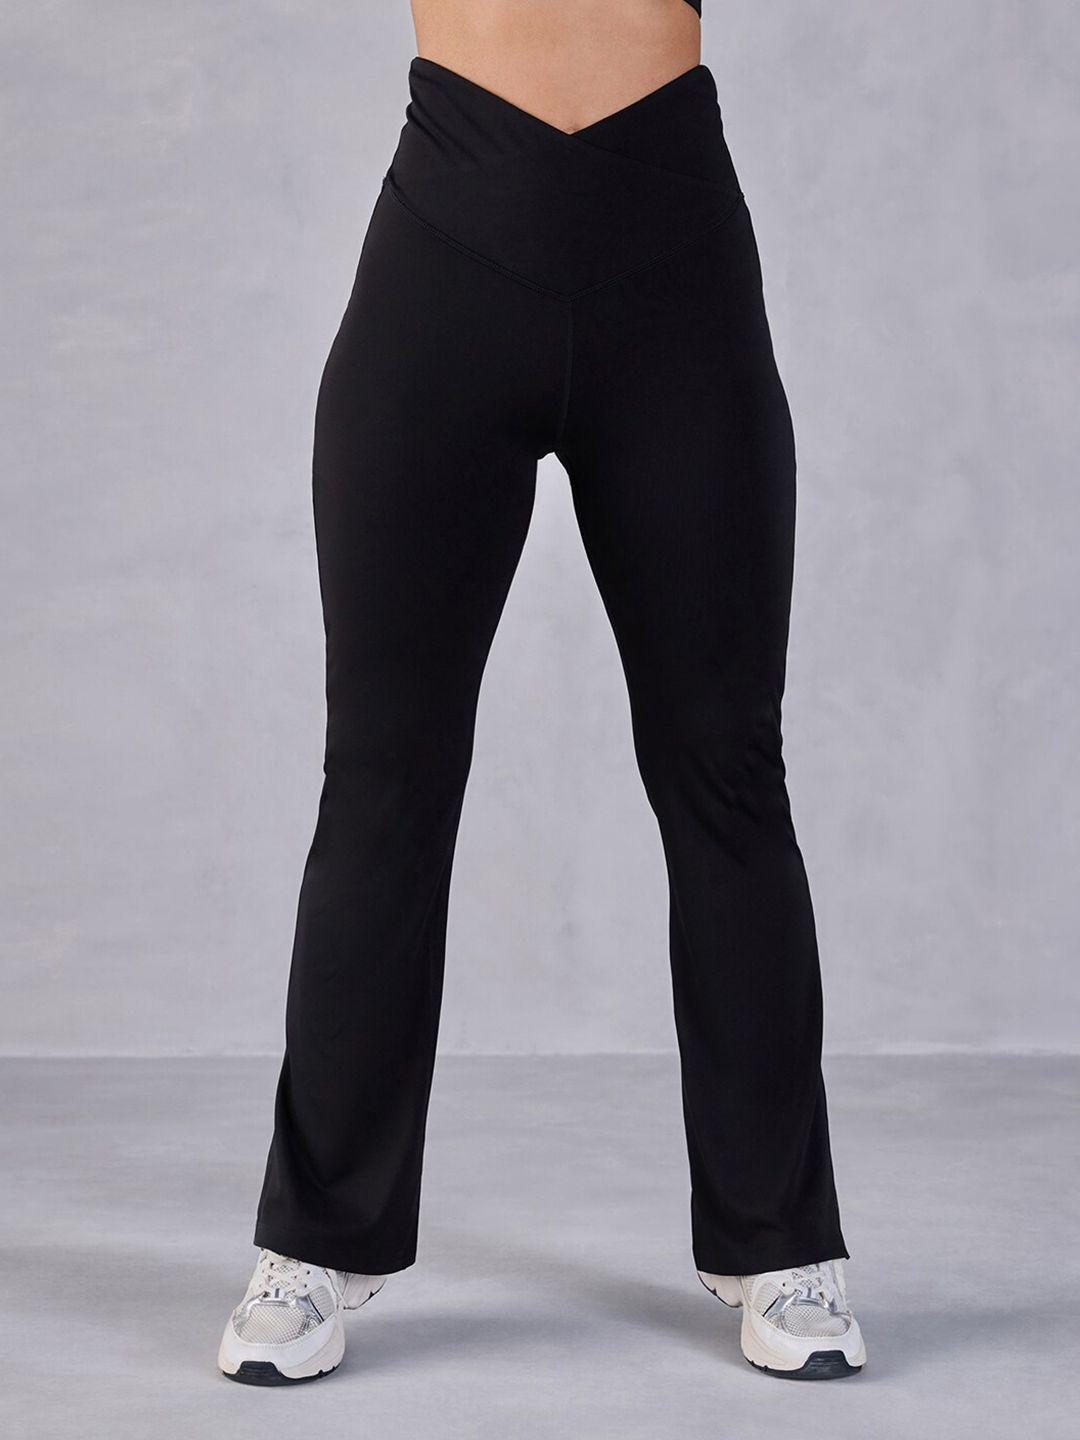 kica winter collection women flared mid-rise track pants